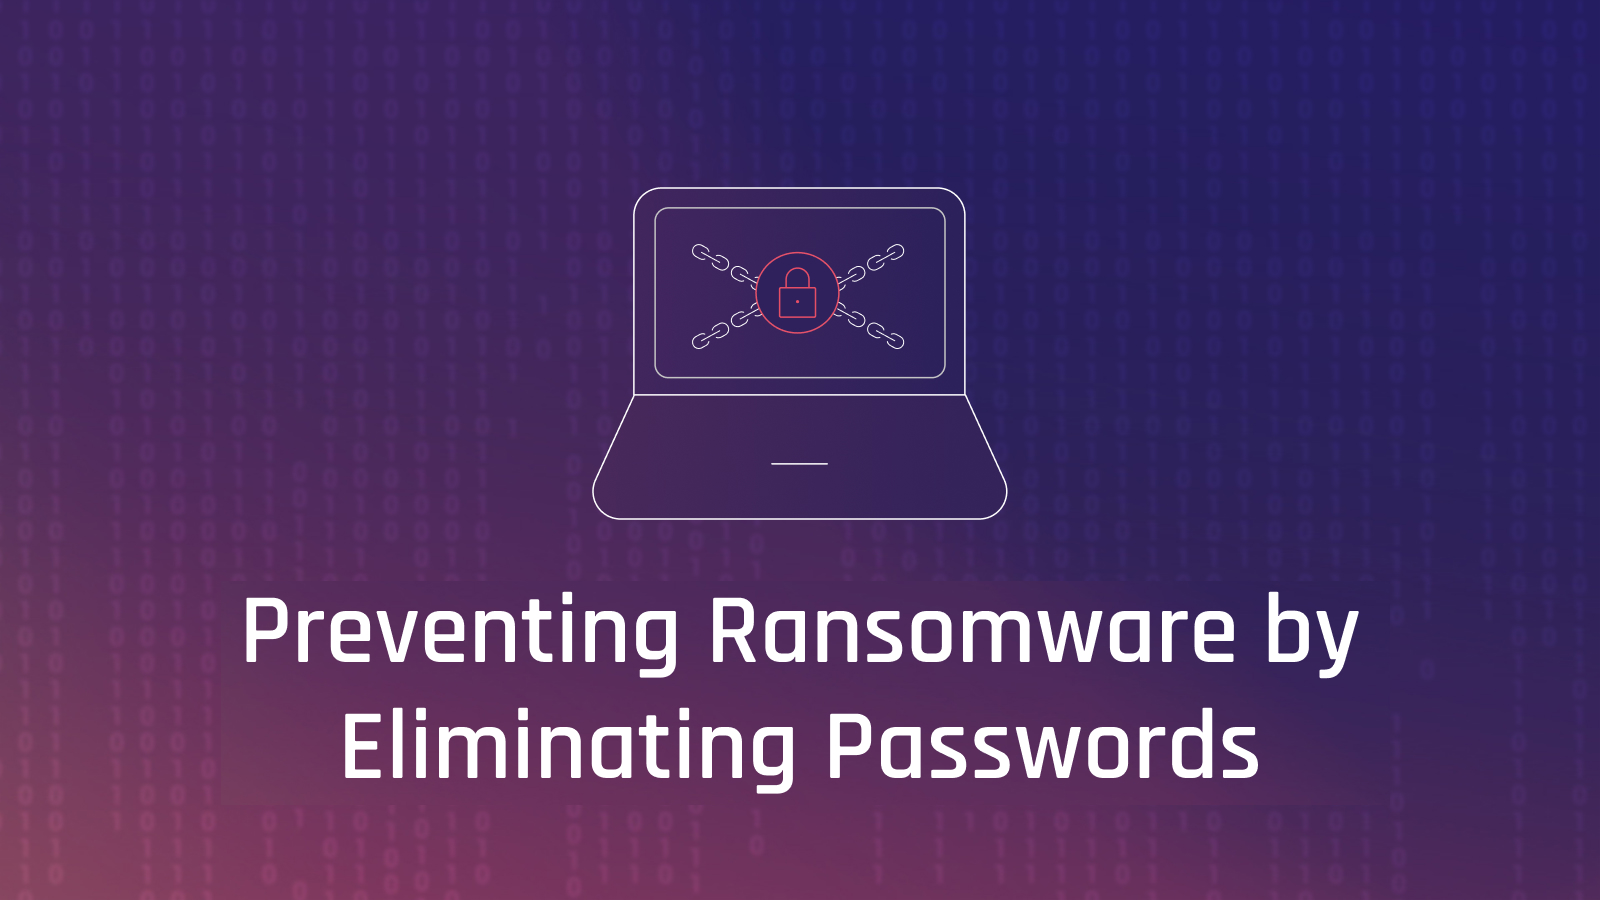 How to Prevent Ransomware by Eliminating Passwords